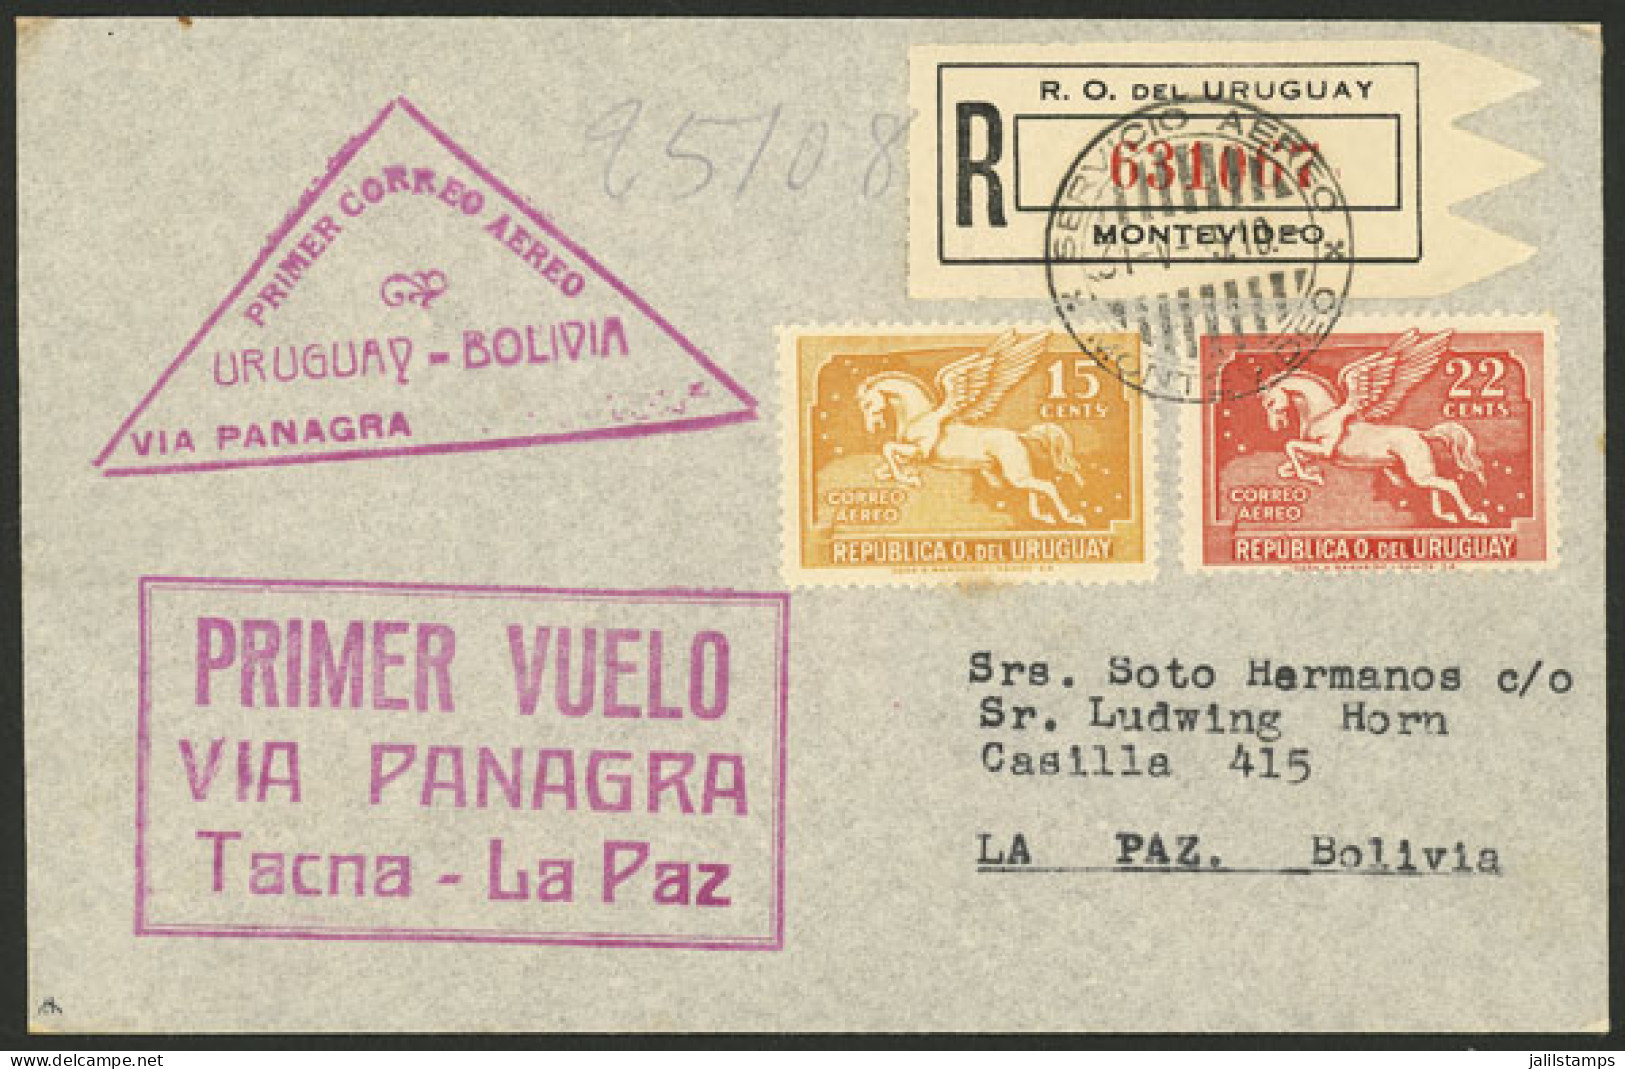 URUGUAY: 31/JUN/1935 Montevideo - La Paz (Bolivia), Airmail Cover Carried On PANAGRA First Flight, With Special Marks Of - Uruguay